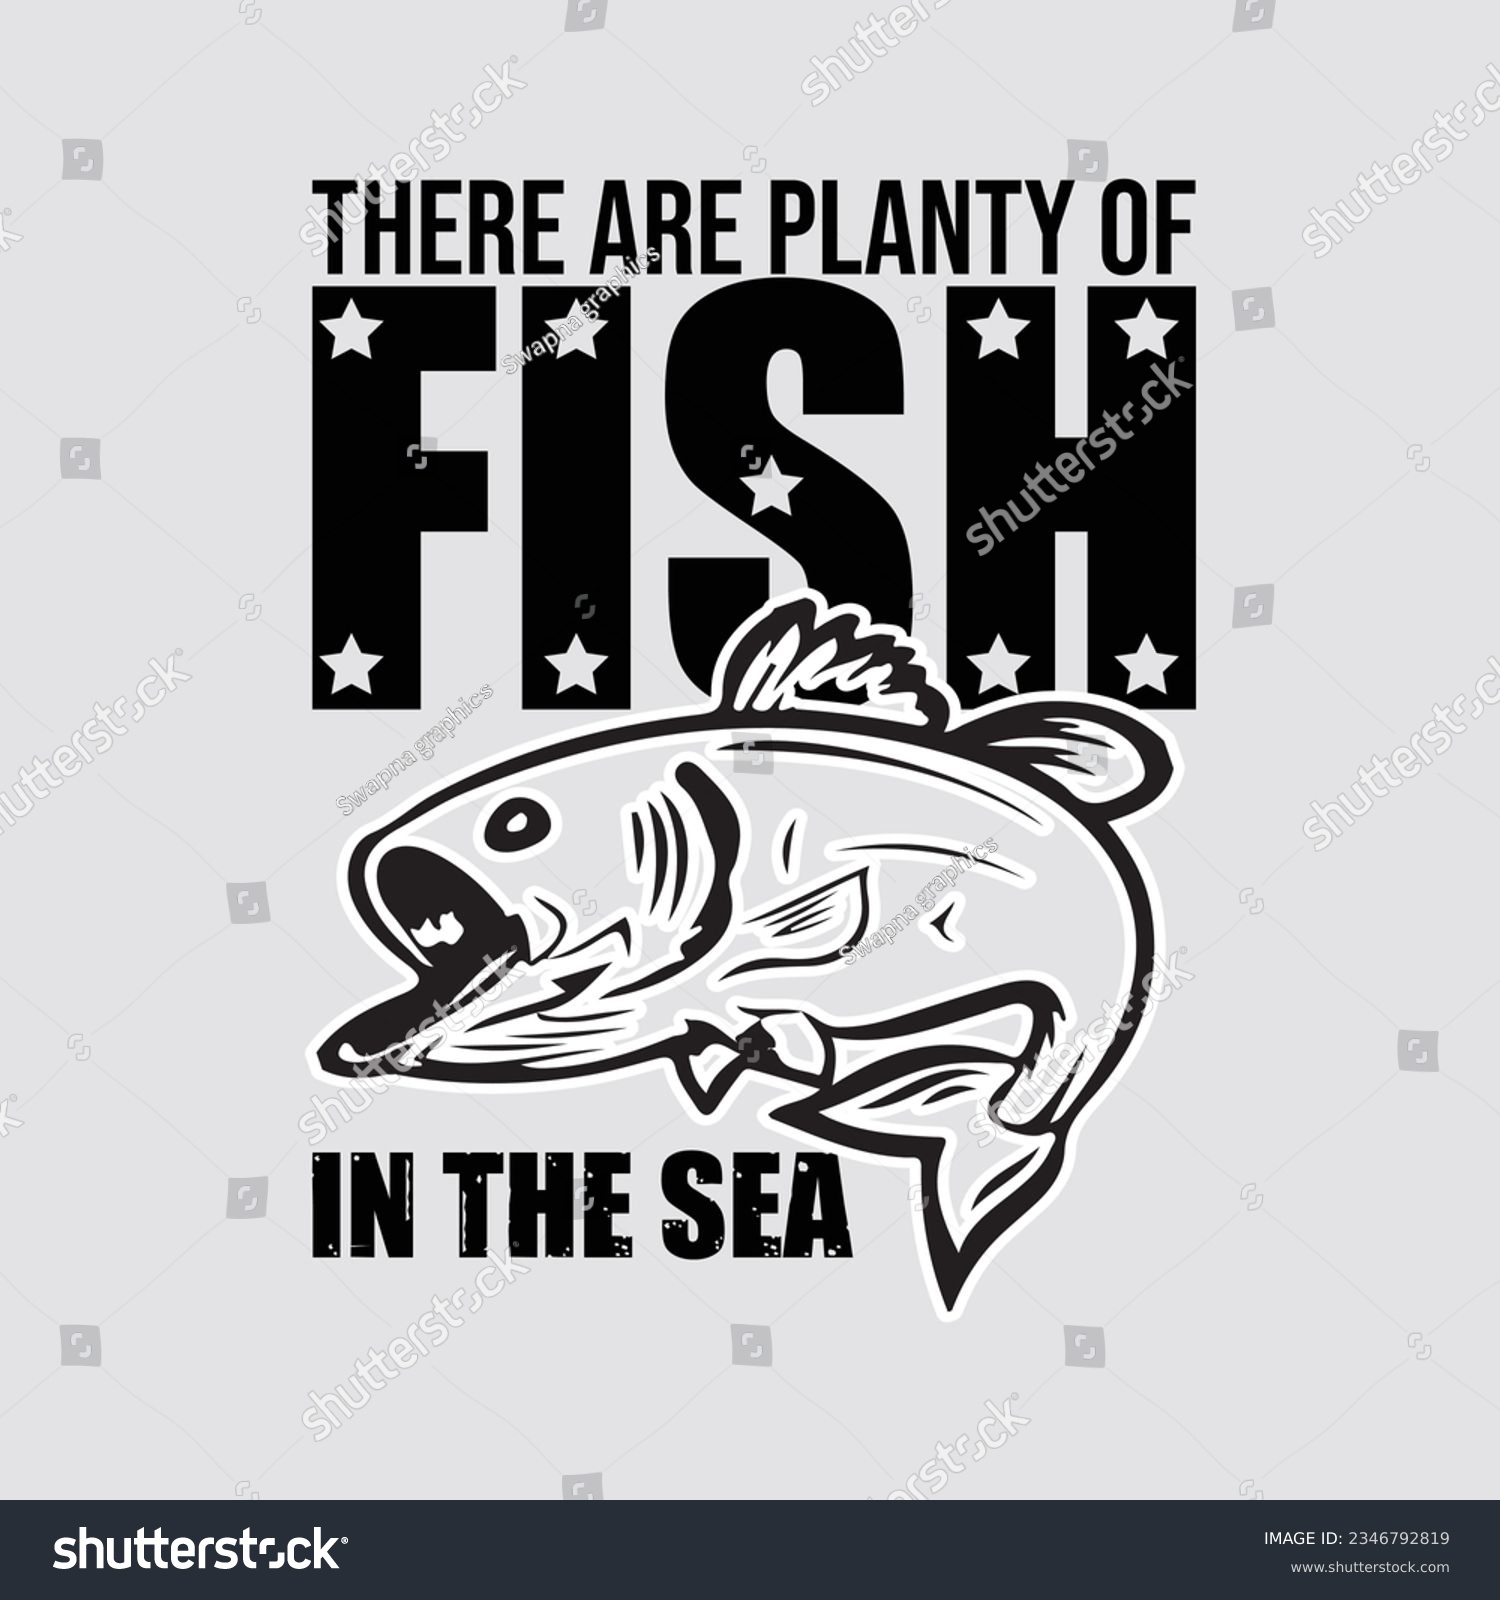 SVG of 
THERE ATE PLANTY OF FISH IN THE SEA, 
CREATIVE FISHING T SHIRT DESIGN  svg